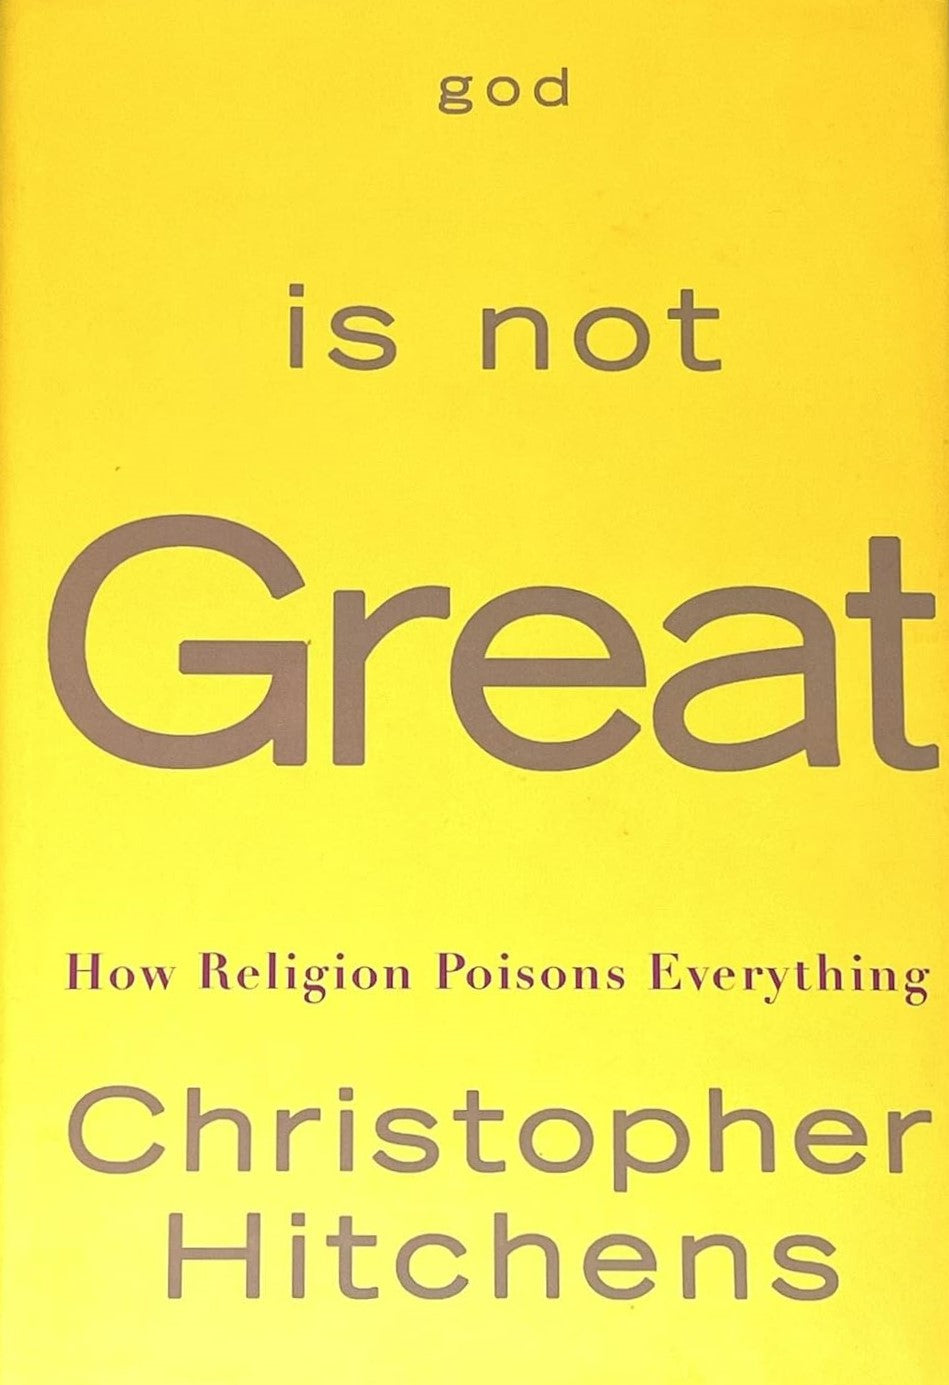 Livre ISBN 077104142X God is Not Great : How Religion Pouisons Everything (Christopher Hitchens)